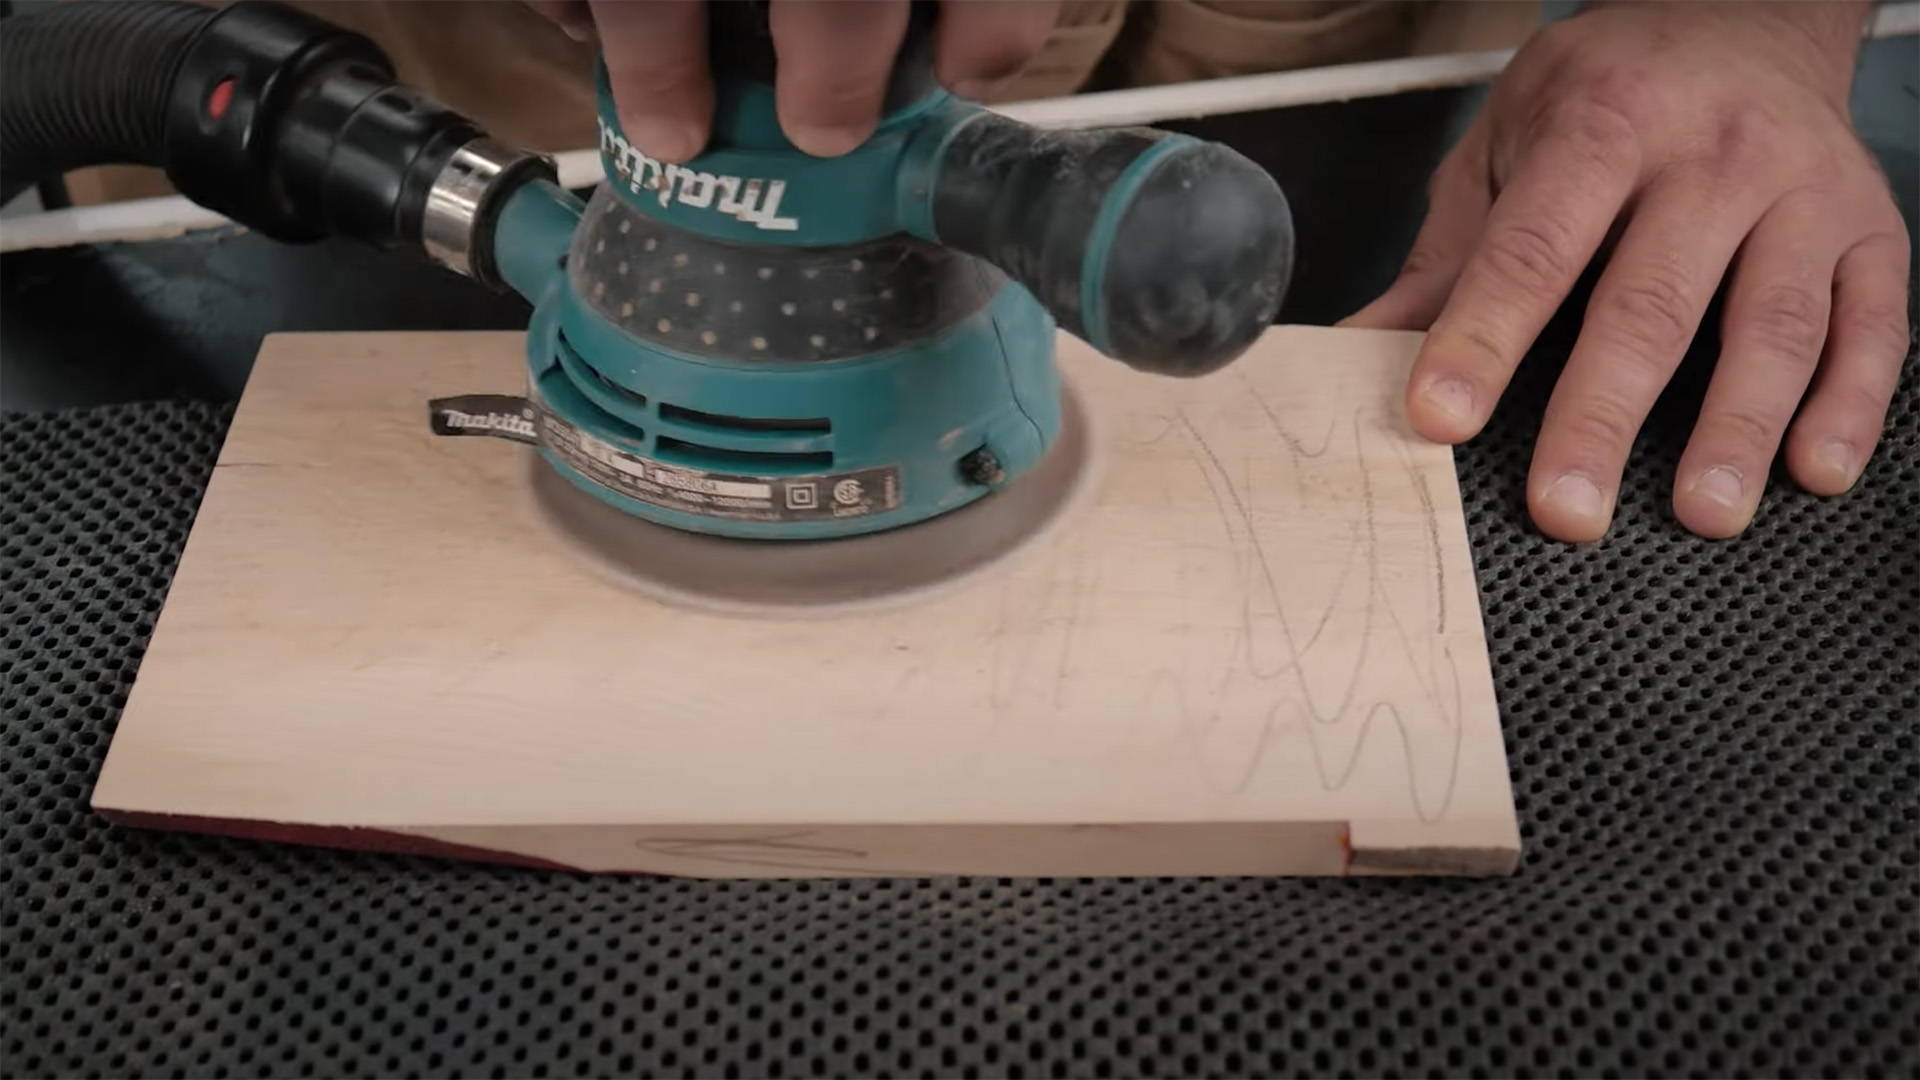 Router Guide Bushings 101: Why They Rock and How to Use them Like a Pro